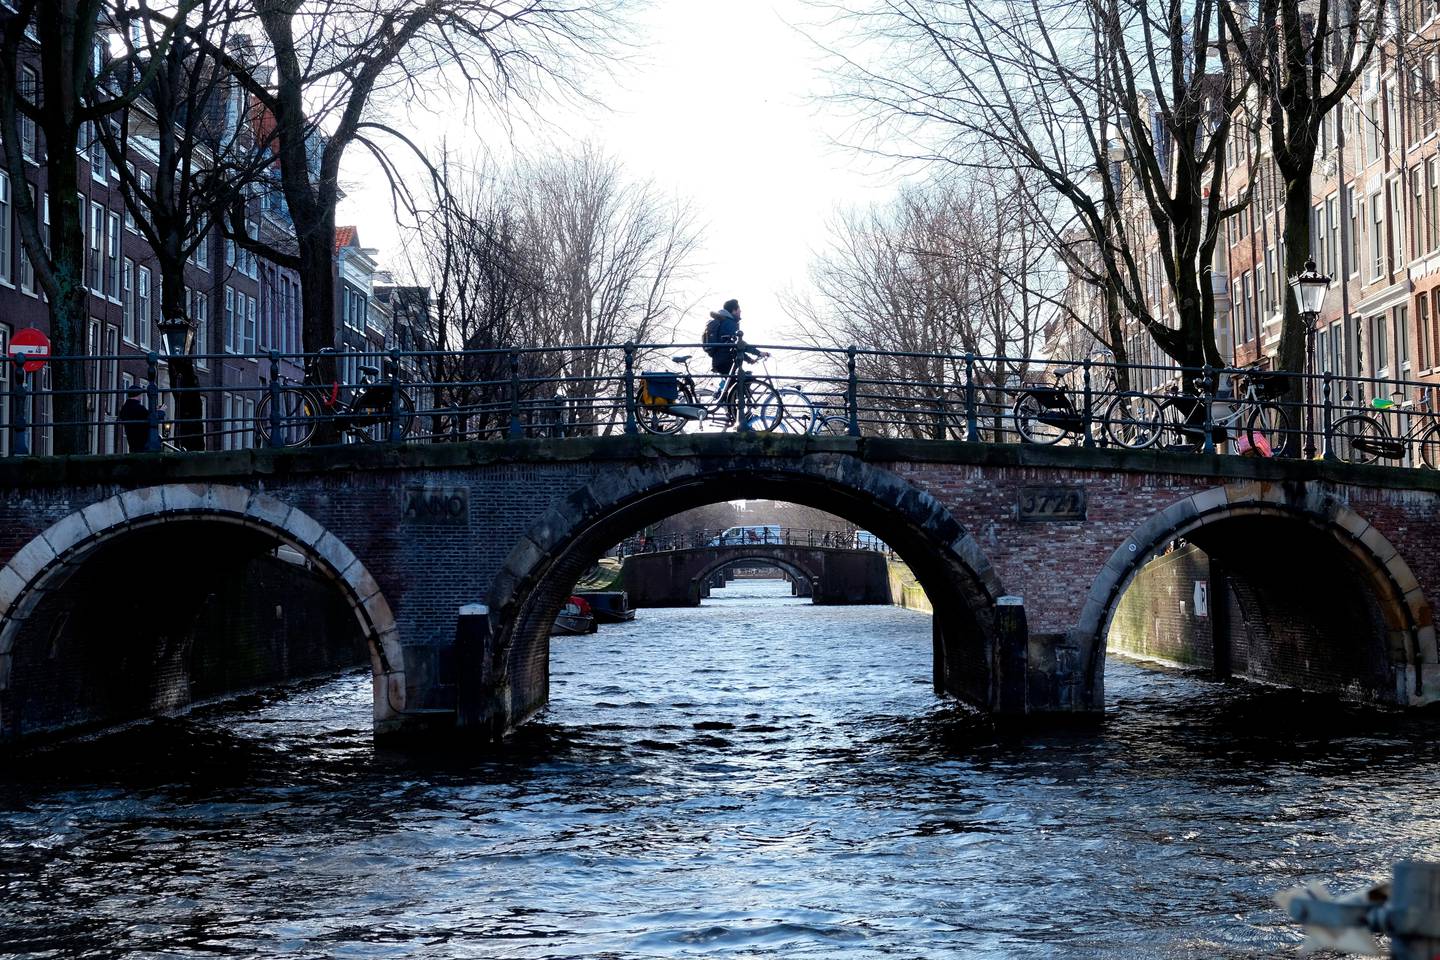 A cyclist pedals over a bridge over the Leidsegracht canal in Amsterdam, Thursday, Feb. 7, 2019.  Amsterdam's city hall says that kilometers (miles) of walls along its world famous canals are crumbling and in urgent need of repair following years of neglect. (AP Photo/Michael Corder)